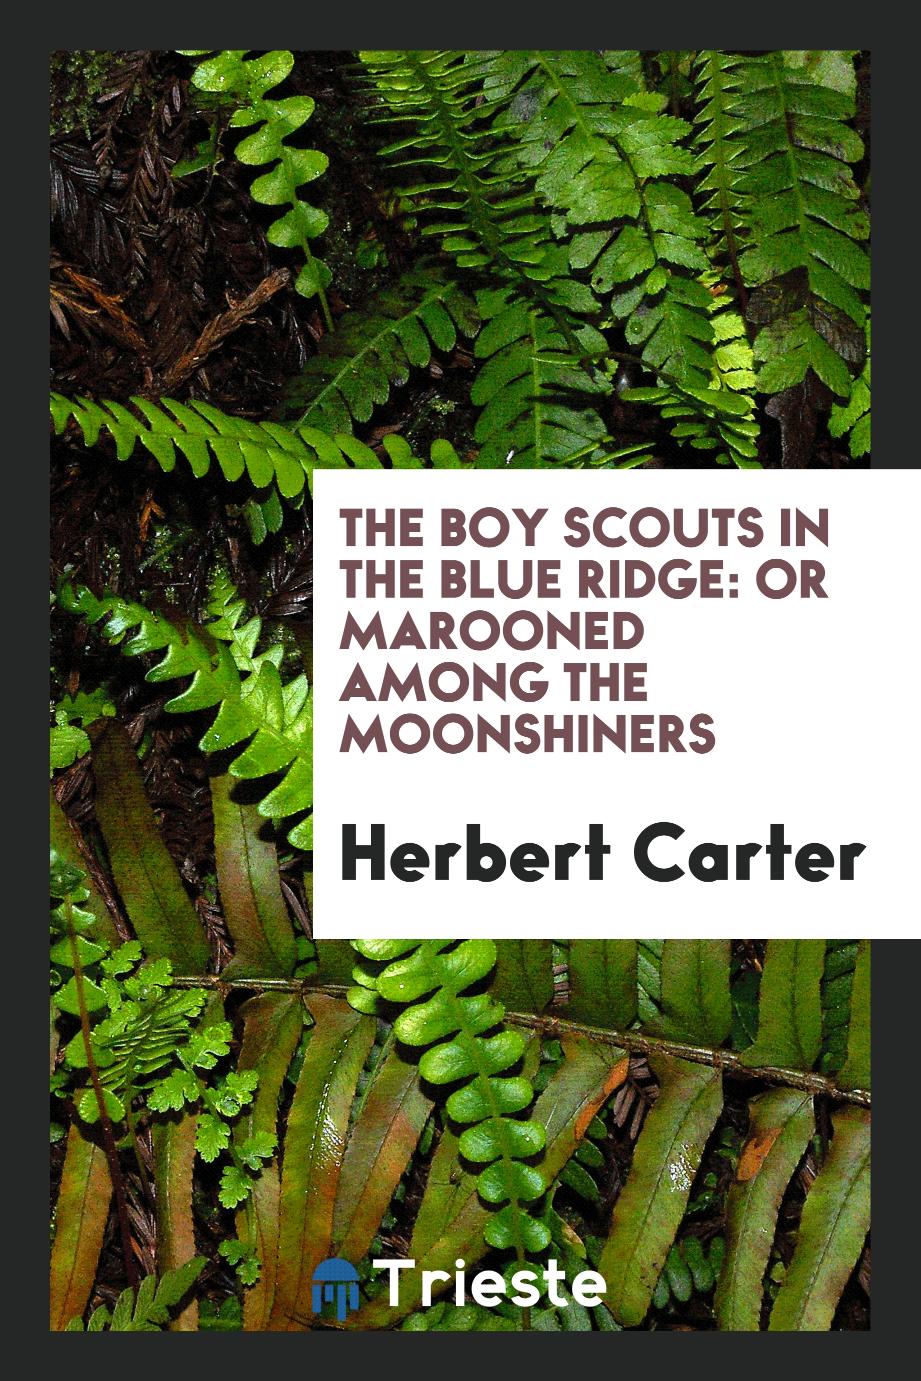 The Boy Scouts in the Blue Ridge: or marooned among the moonshiners